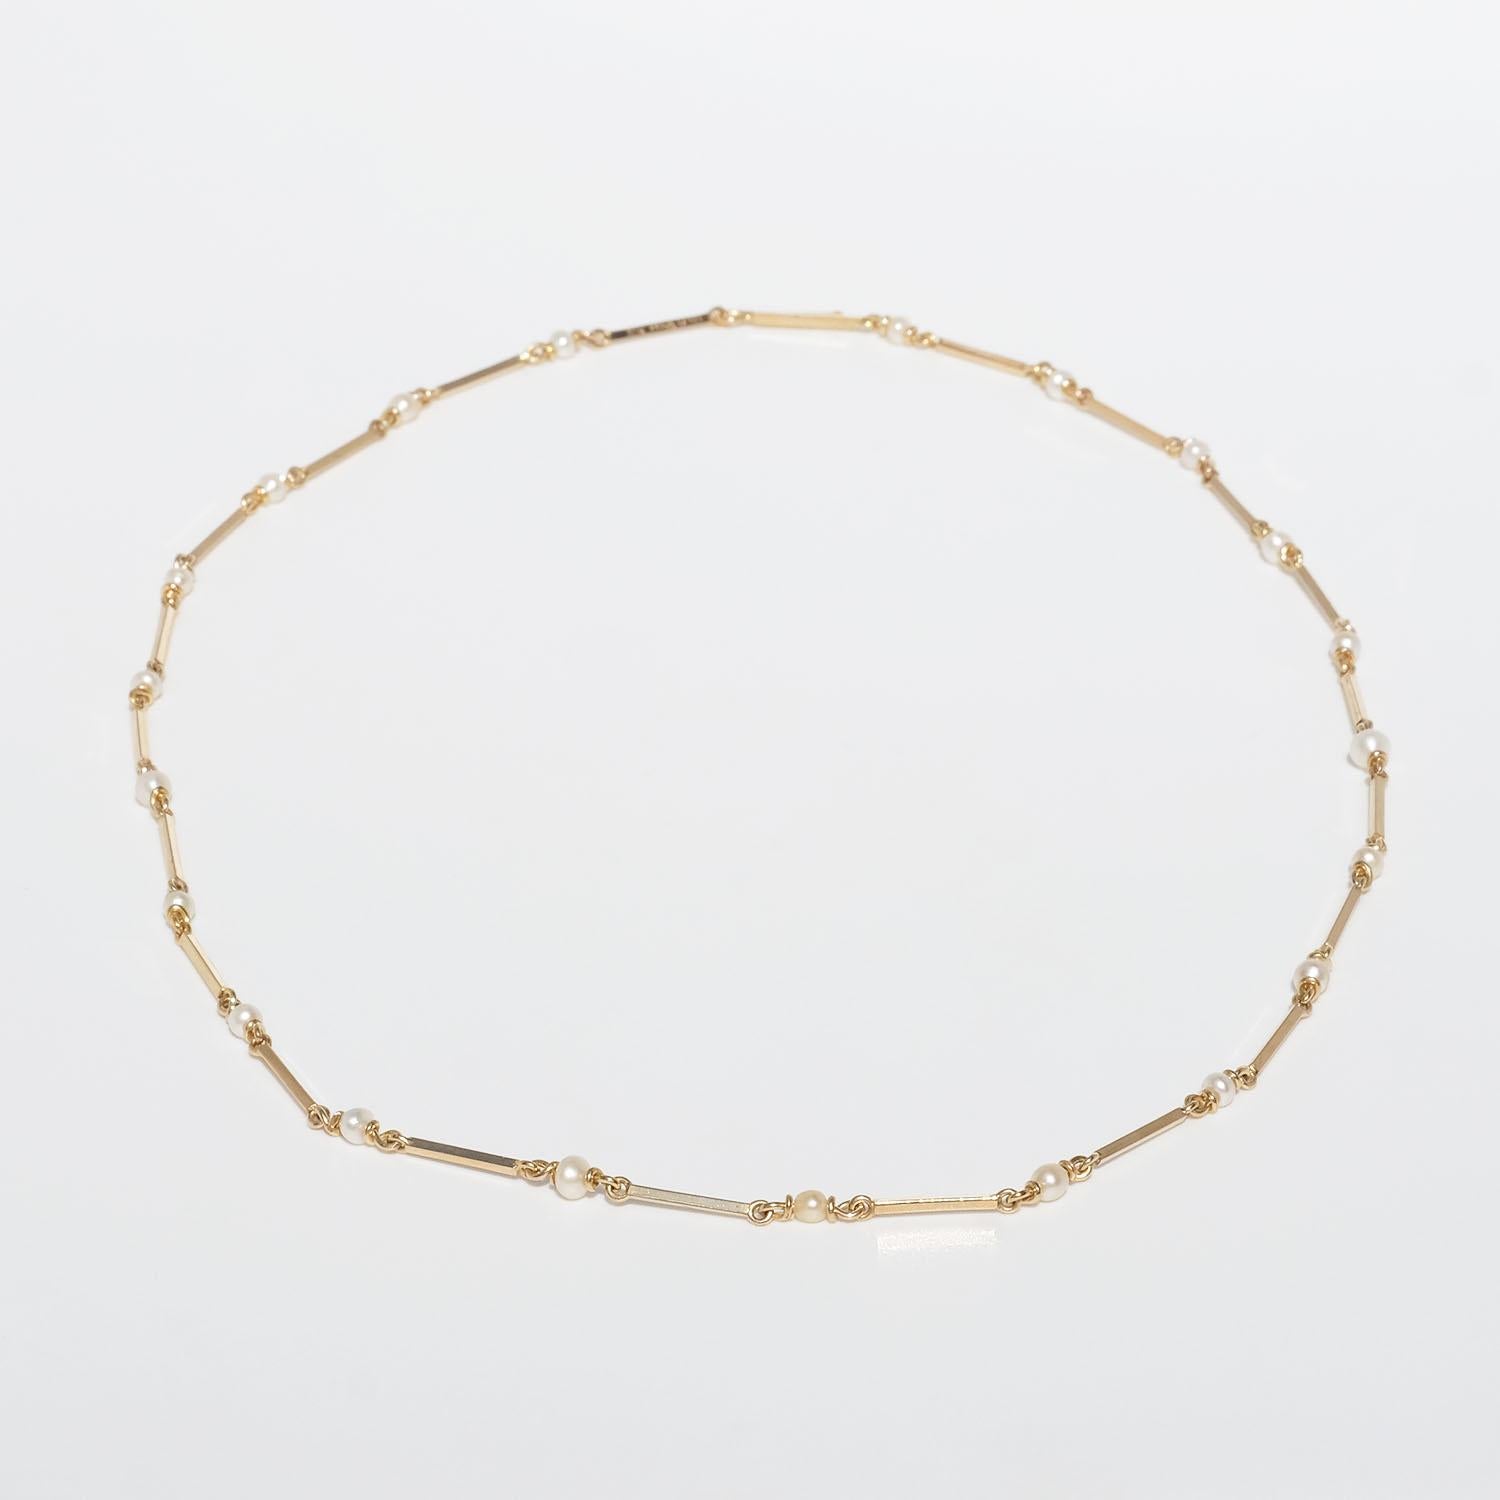 This 18 karat gold necklace is made of rectangular gold bars which are linked together. Each link is embraced by cultured pearls. The gold has a shiny surface. The necklace closes easily with a hook.

The necklace is perfect for the everyday